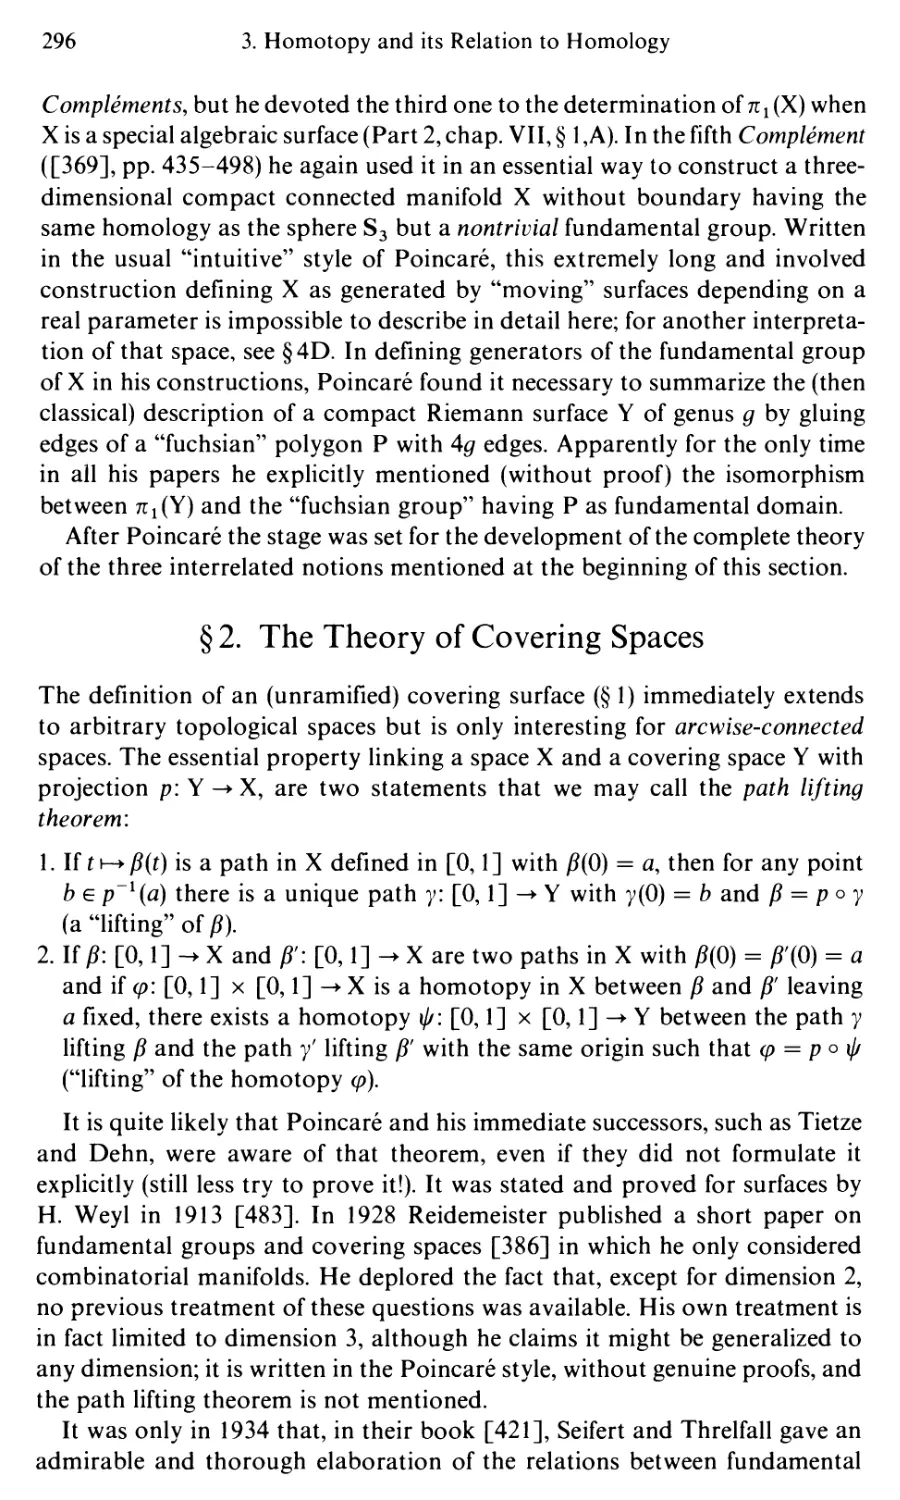 §2. The Theory of Covering Spaces